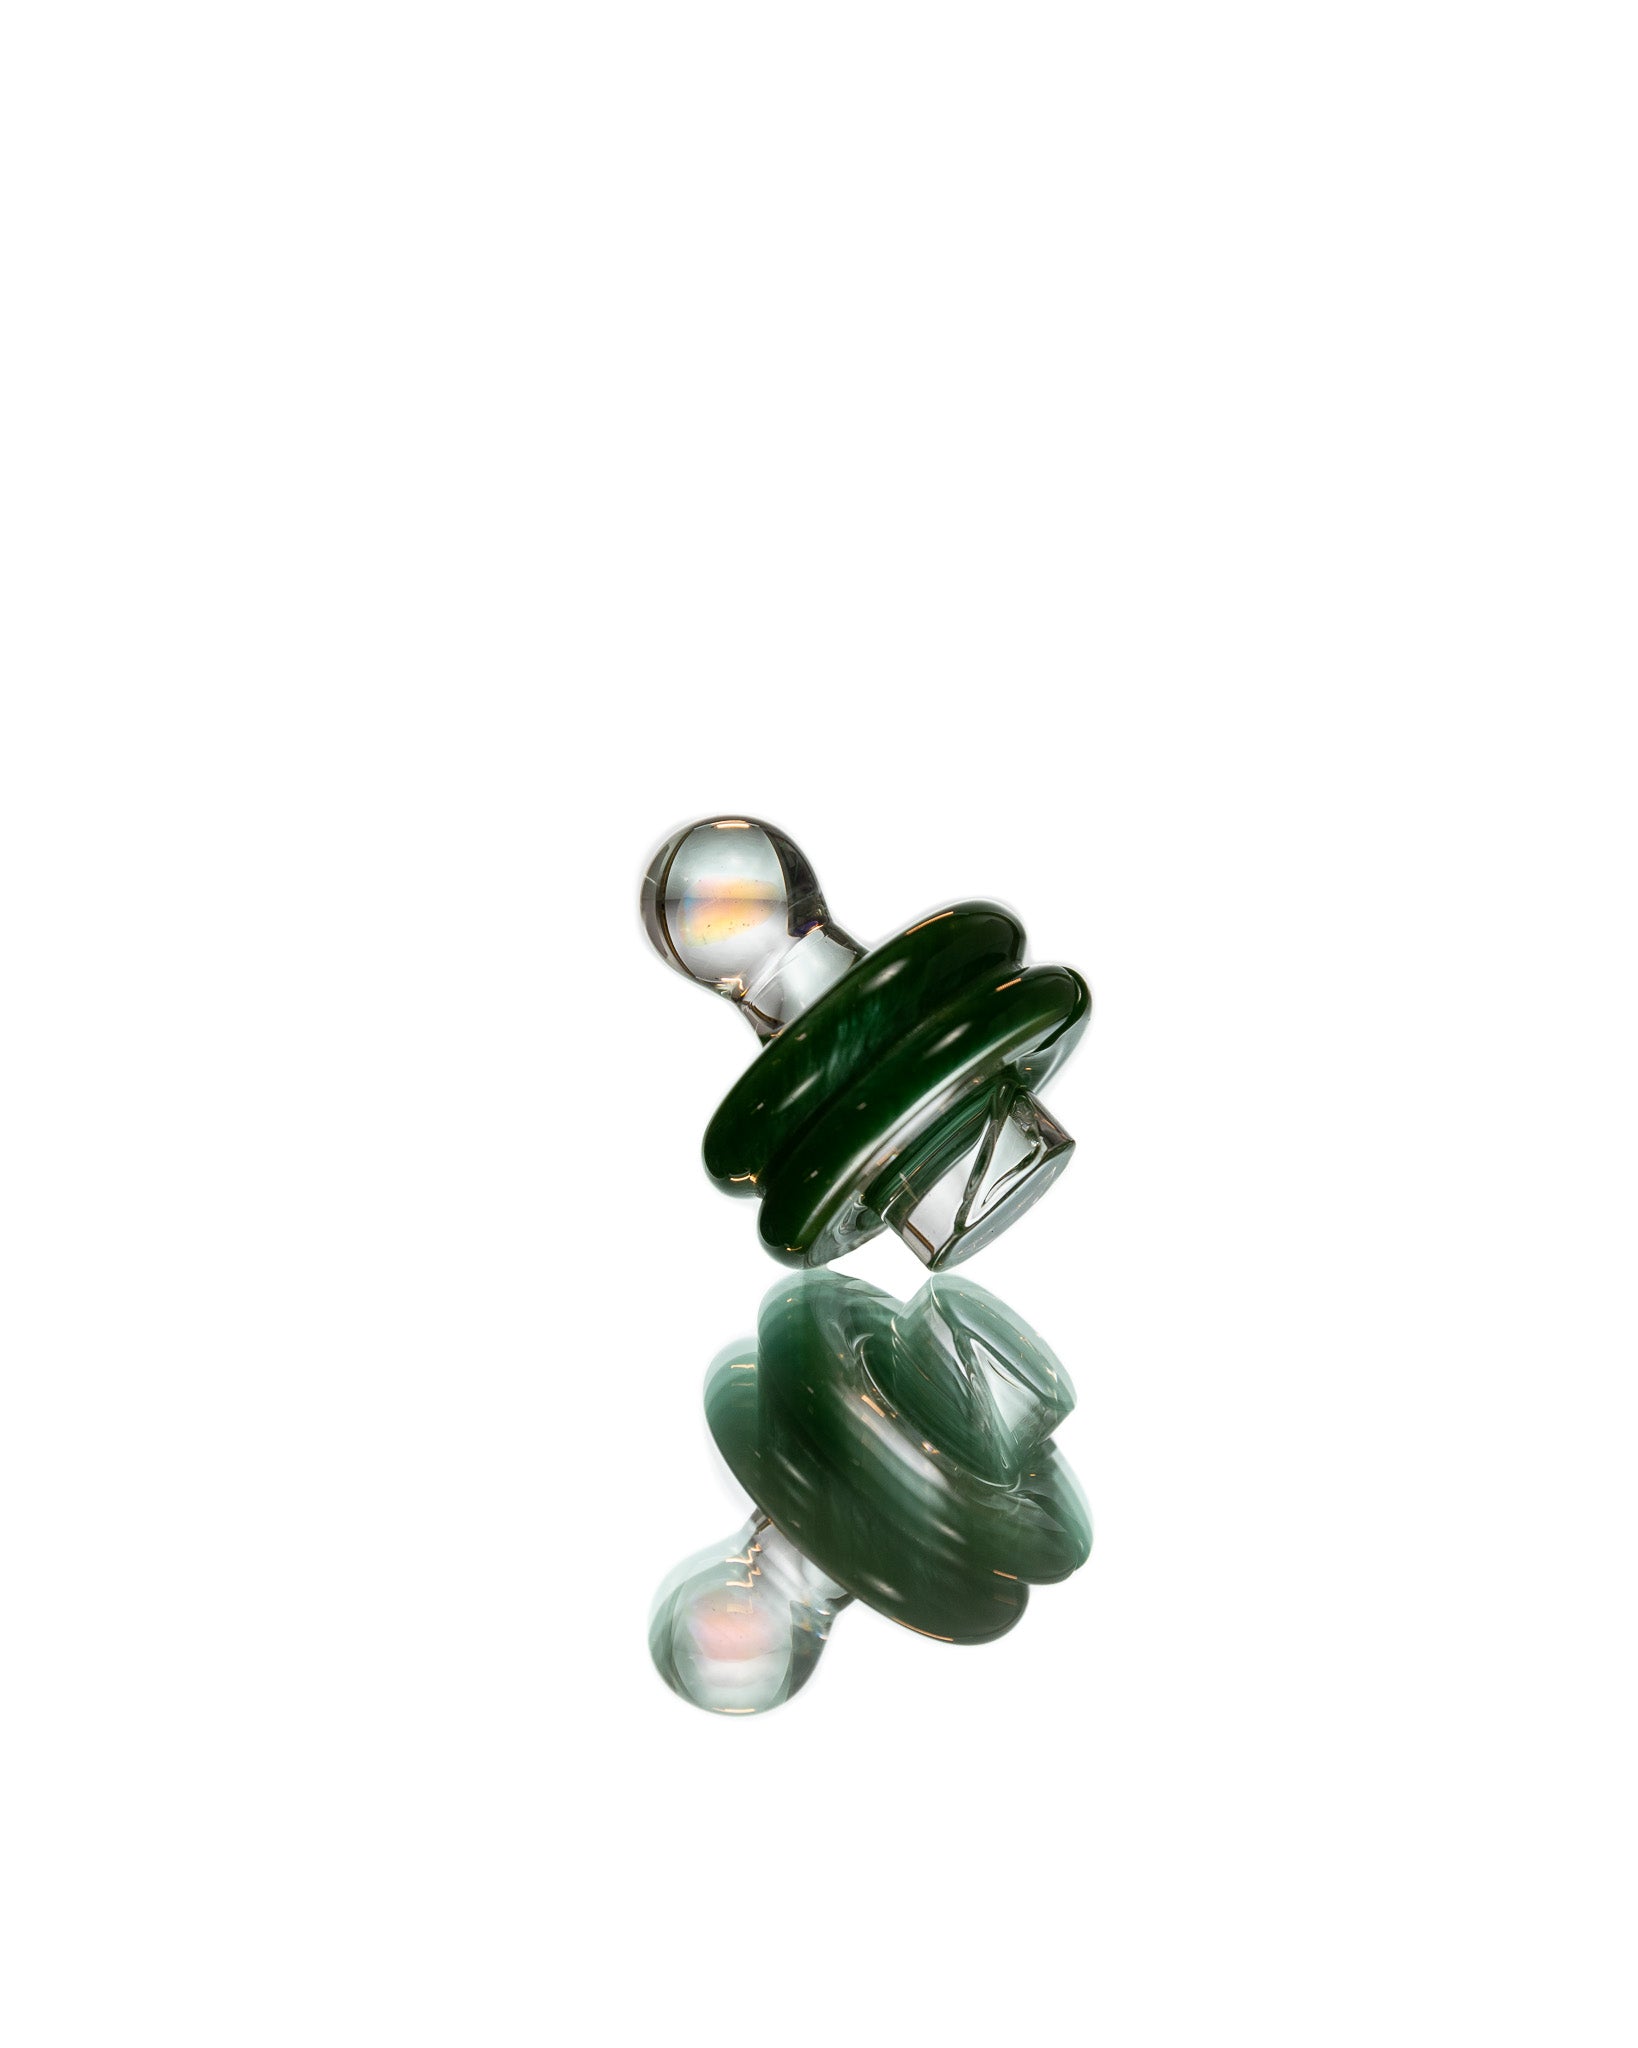 One Trick Pony - "Forrest Green" Opal "Rockulus" Spinner Cap